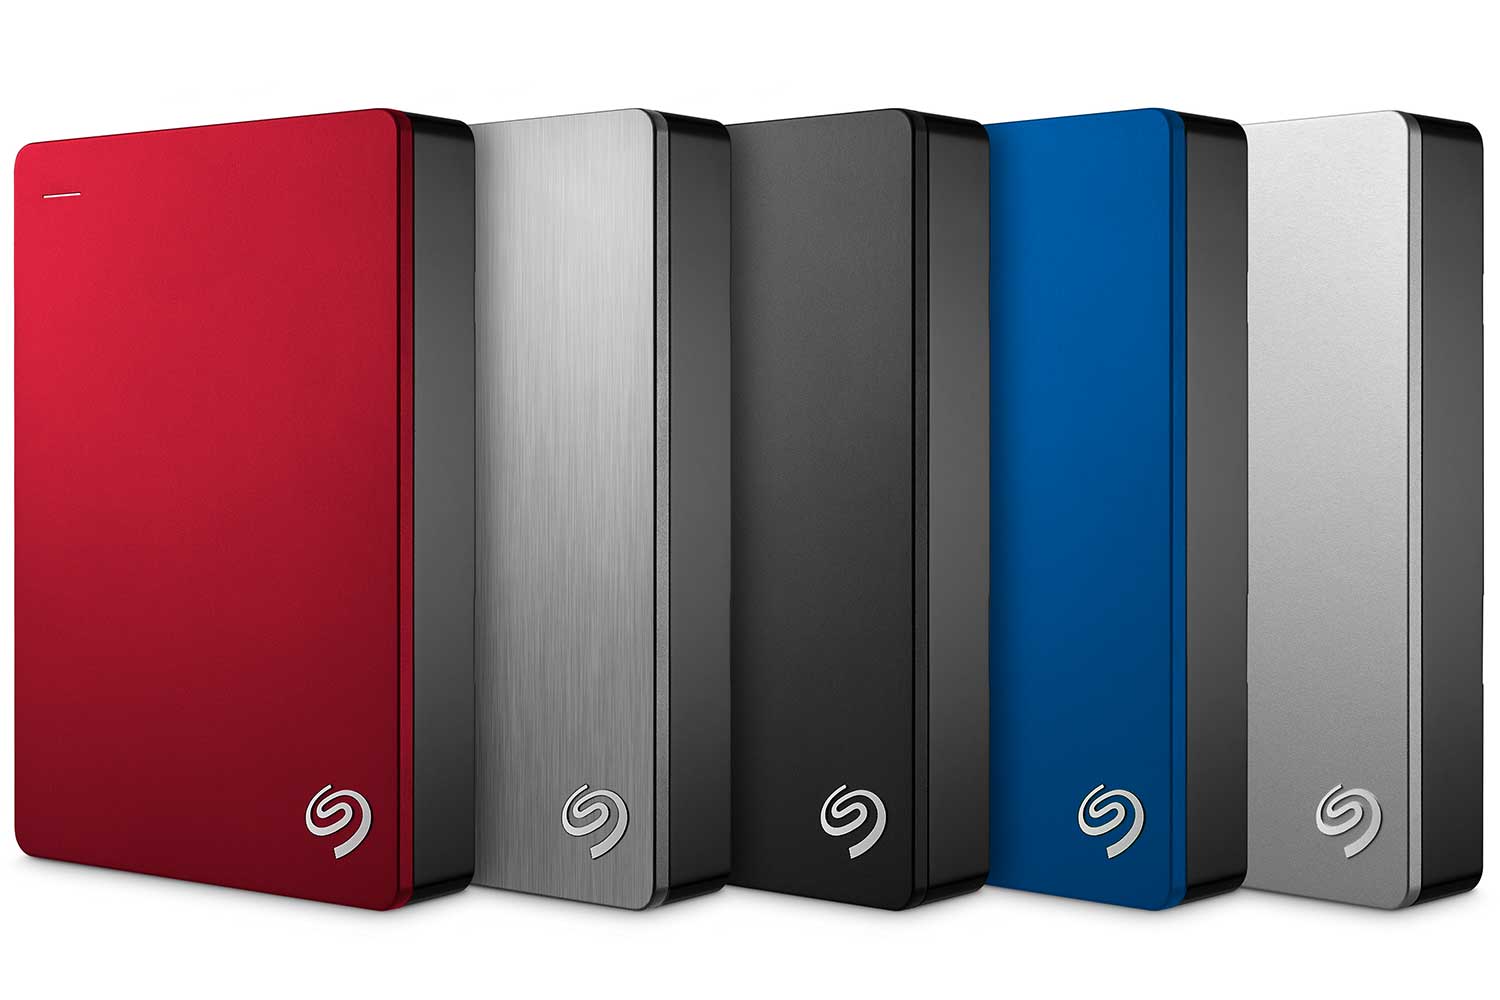 A high-capacity external hard drive is an affordable way to backup all your important files when working from home.
Courtesy Seagate